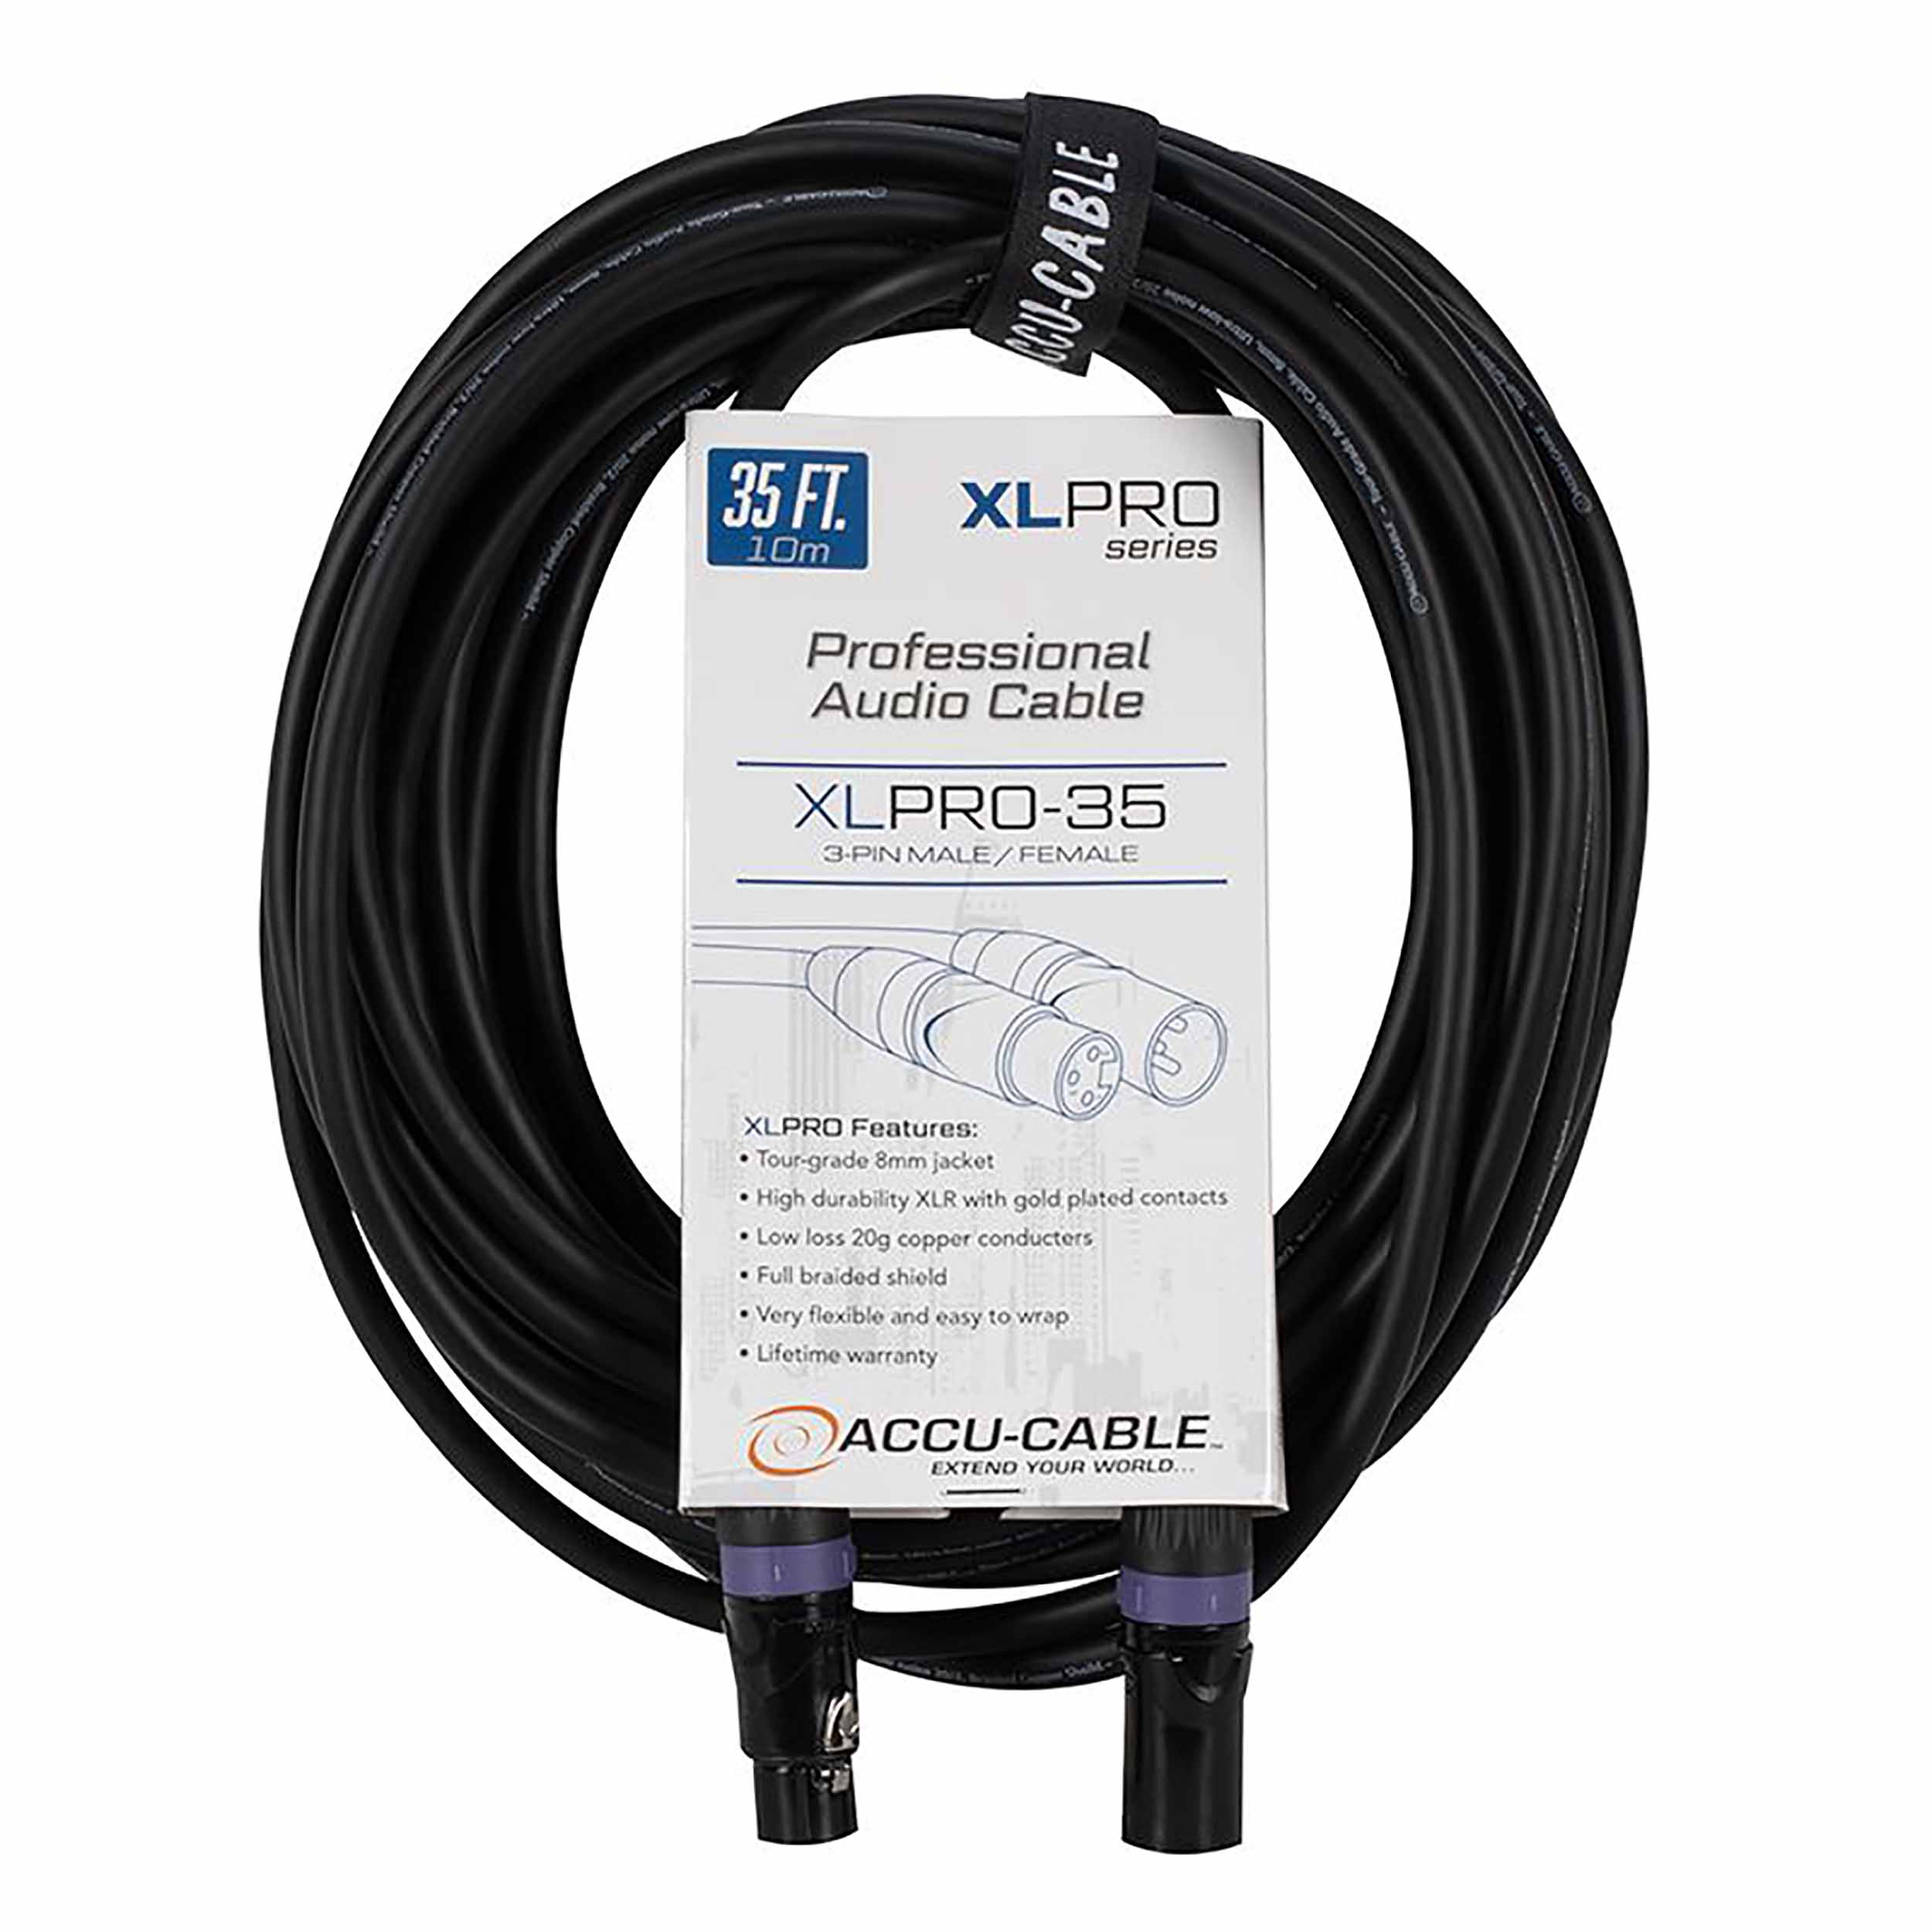 Accu-Cable XLPRO, Professional Audio Cable with Male to Female XLR Connections by Accu Cable